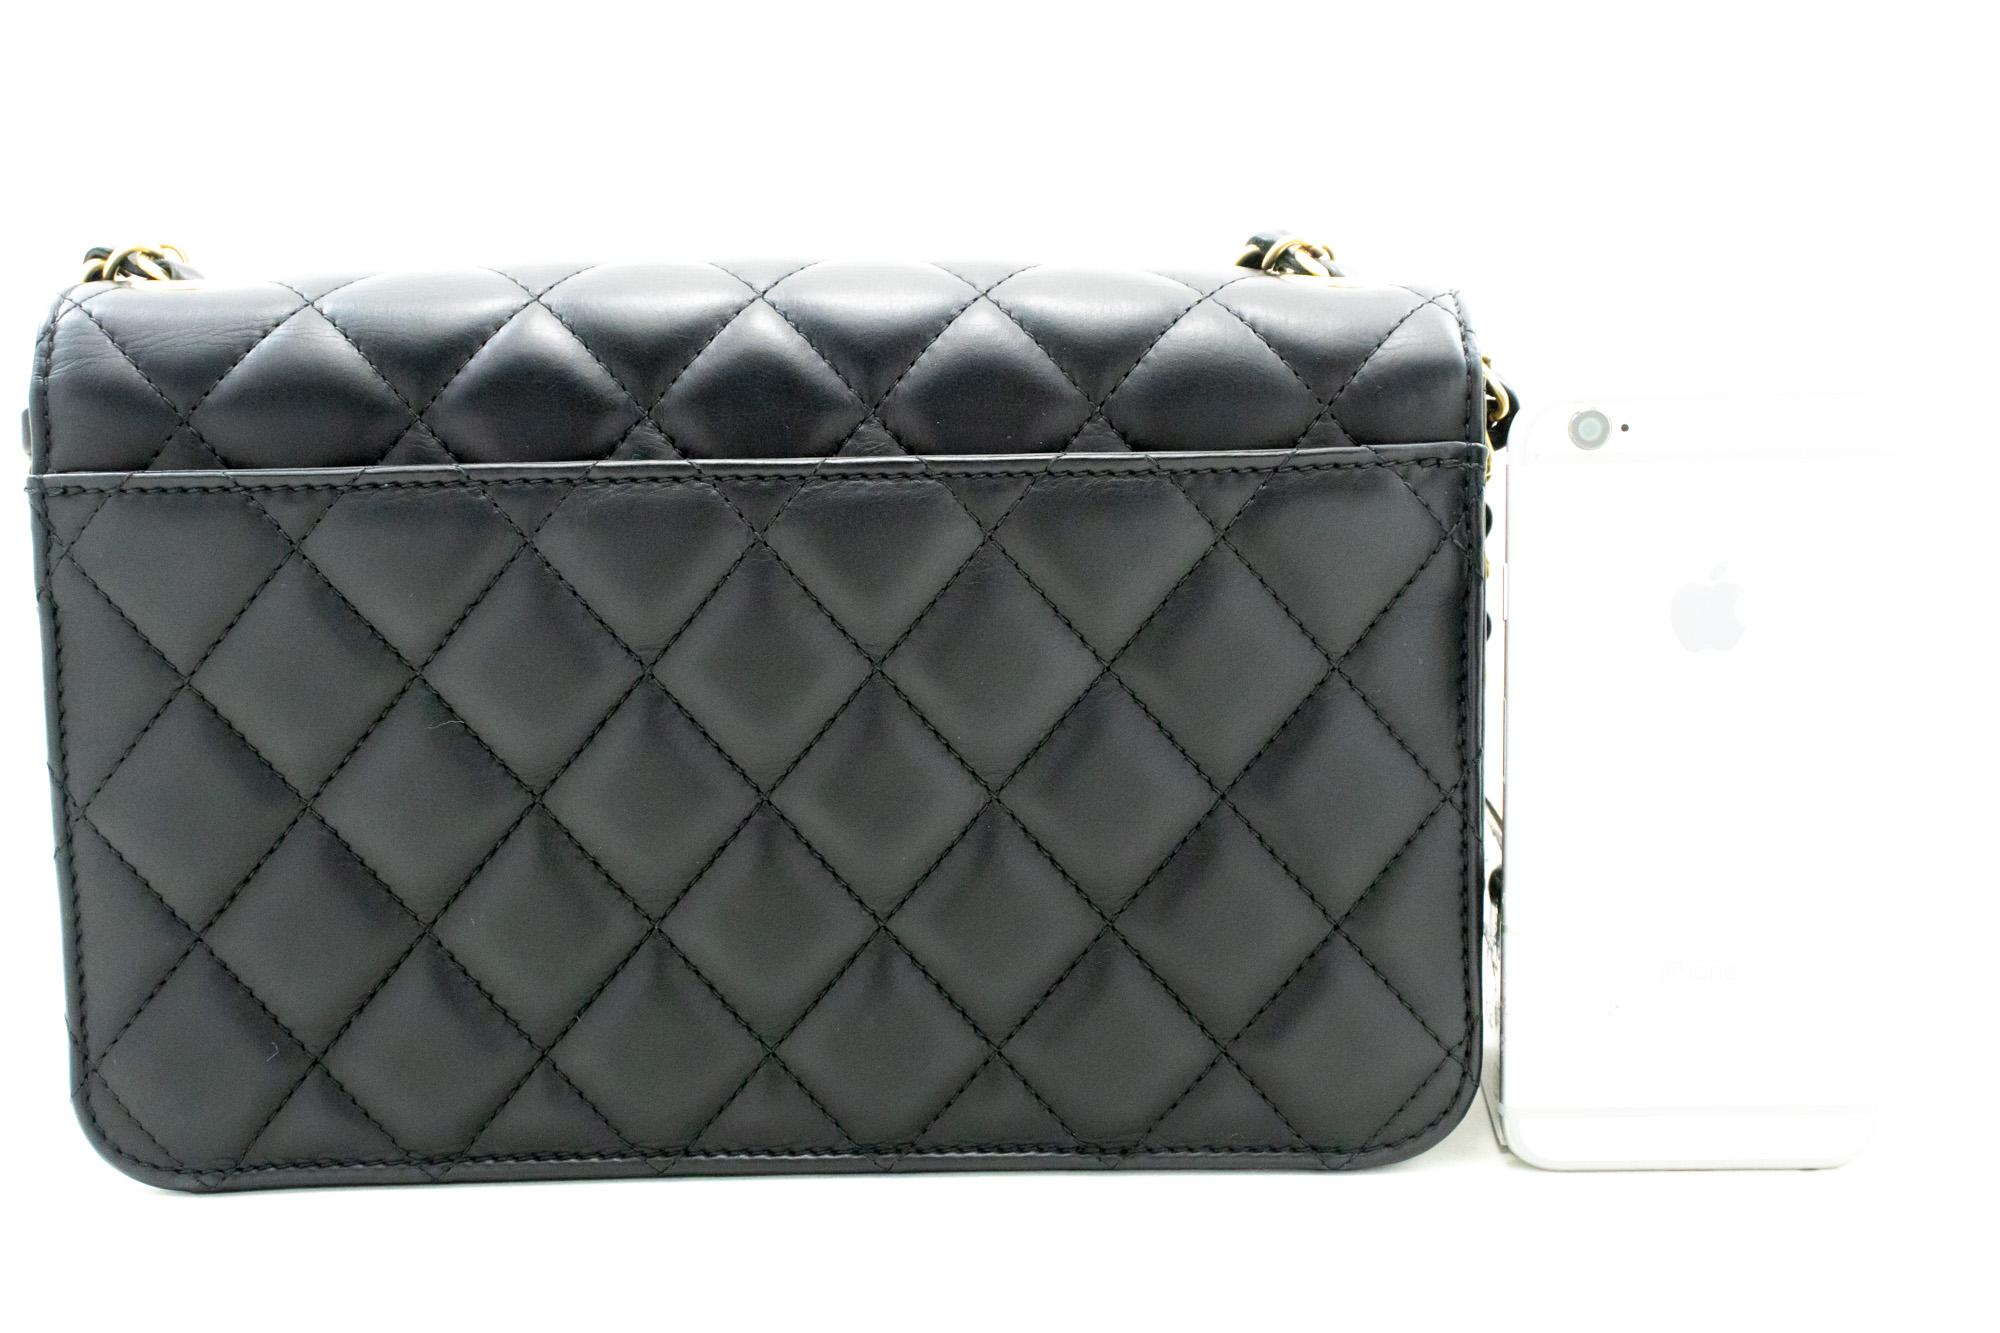 CHANEL Full Chain Flap Shoulder Bag Black Quilted Lambskin Leather In Good Condition For Sale In Takamatsu-shi, JP